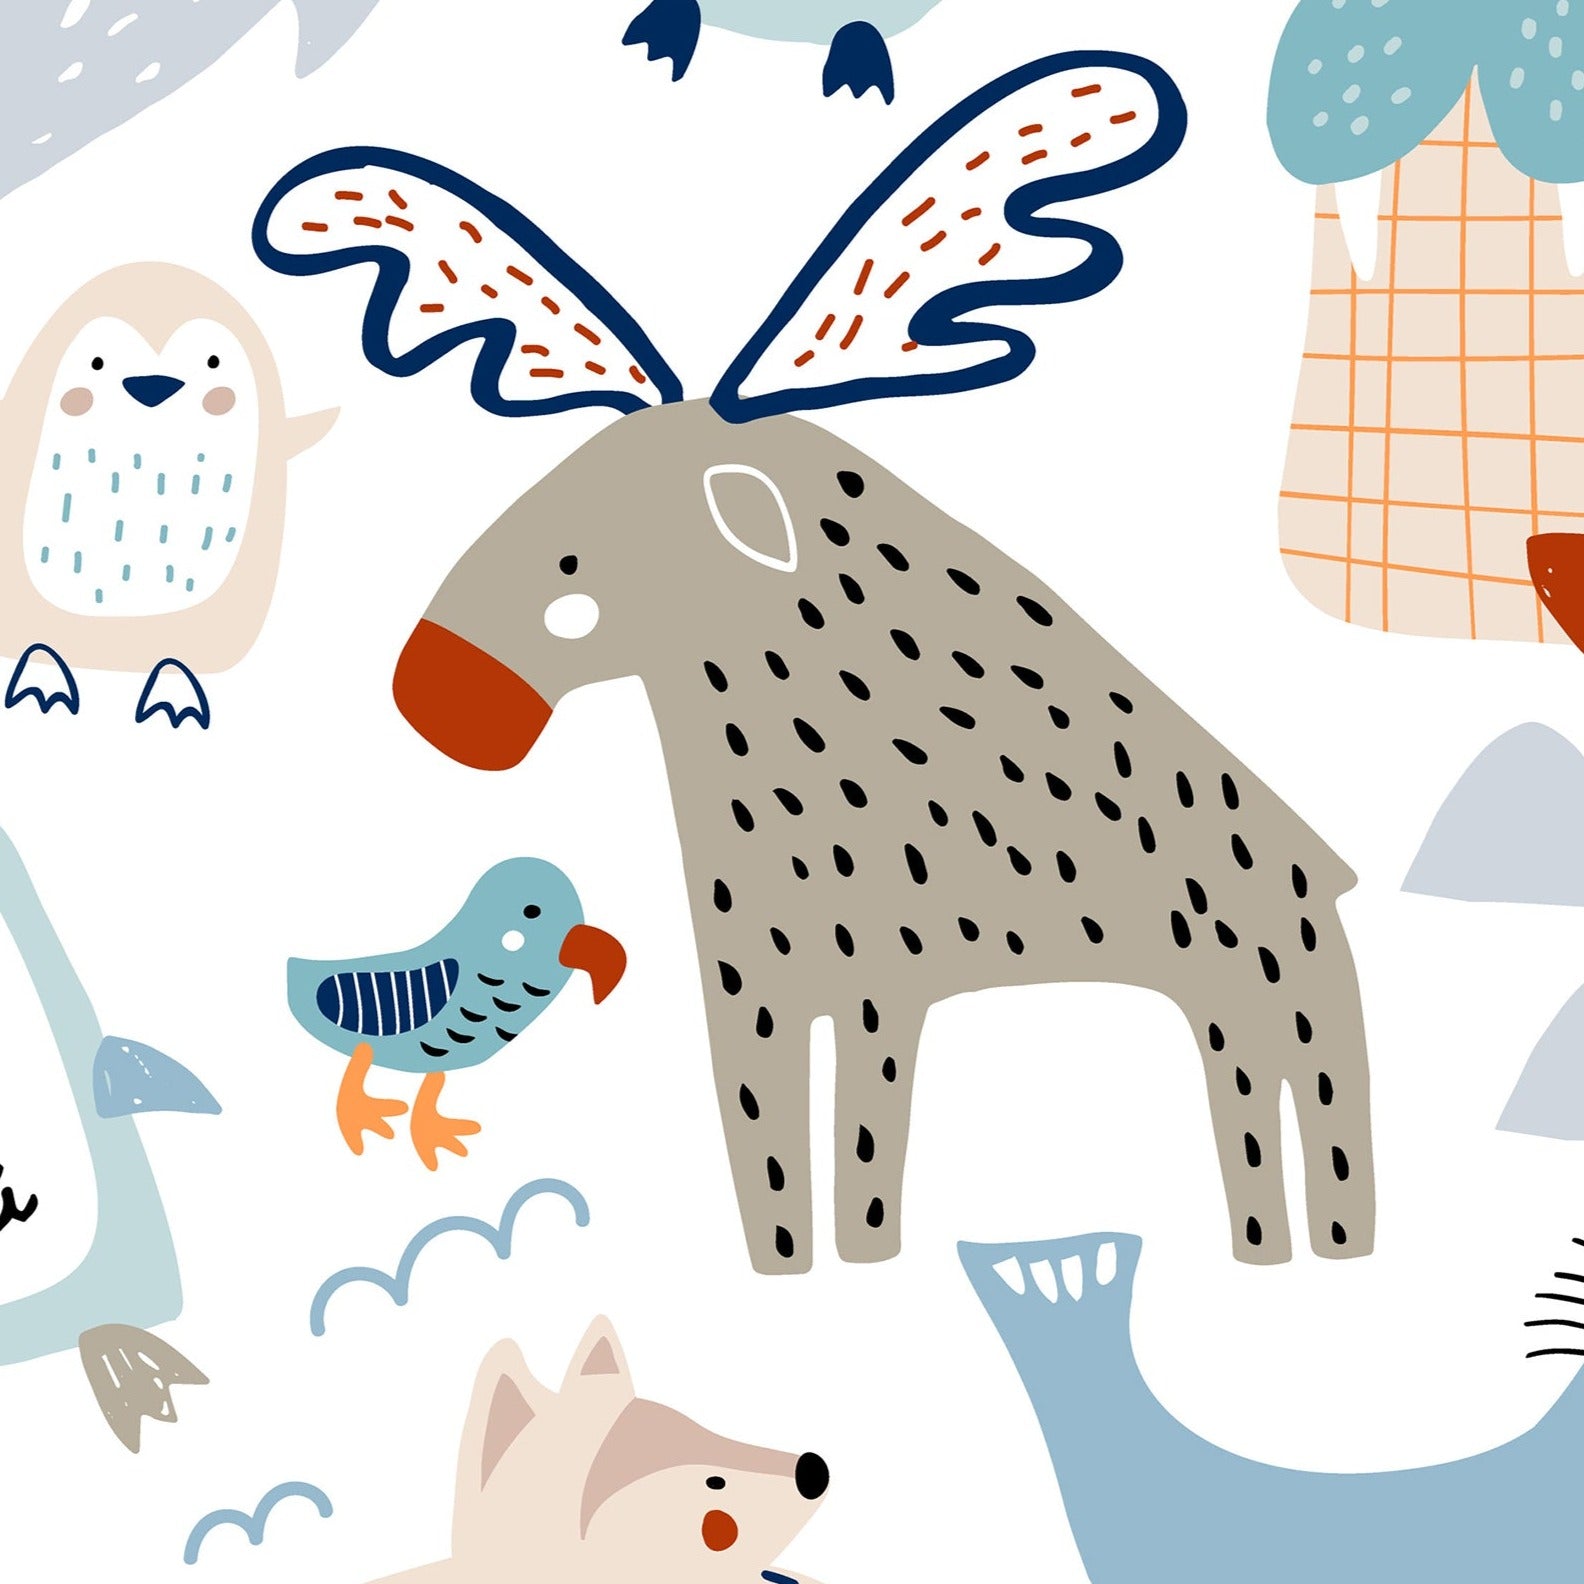 A seamless pattern featuring a whimsical collection of Nordic-inspired animals such as moose with wings, seals, foxes, owls, and penguins, all in a playful and colorful design on a light background.